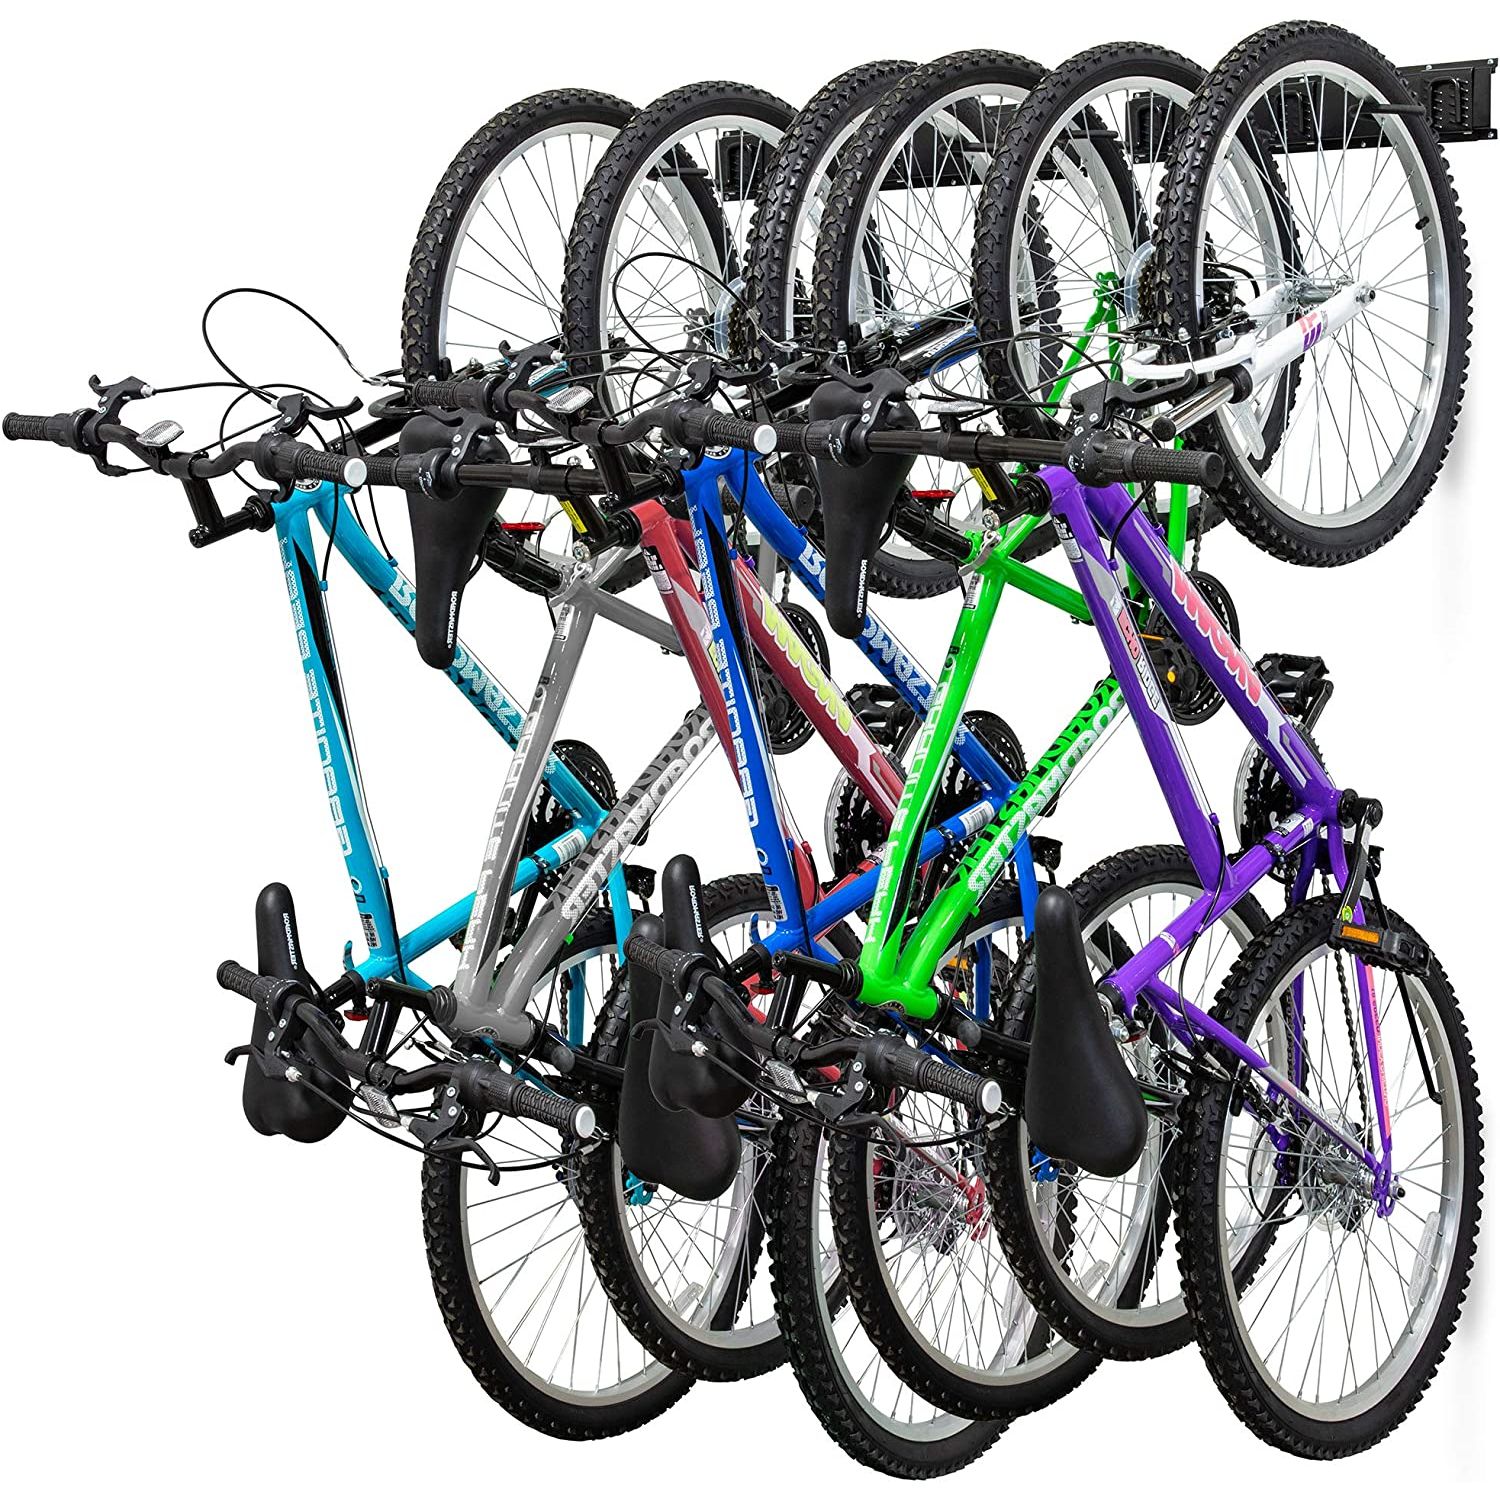 Leisure Sports Vertical Bike Storage Rack for 2 Bicycles, Adjustable Arms,  Fits 7-10ft Ceilings, Durable Wood Construction in the Bike Racks & Storage  department at